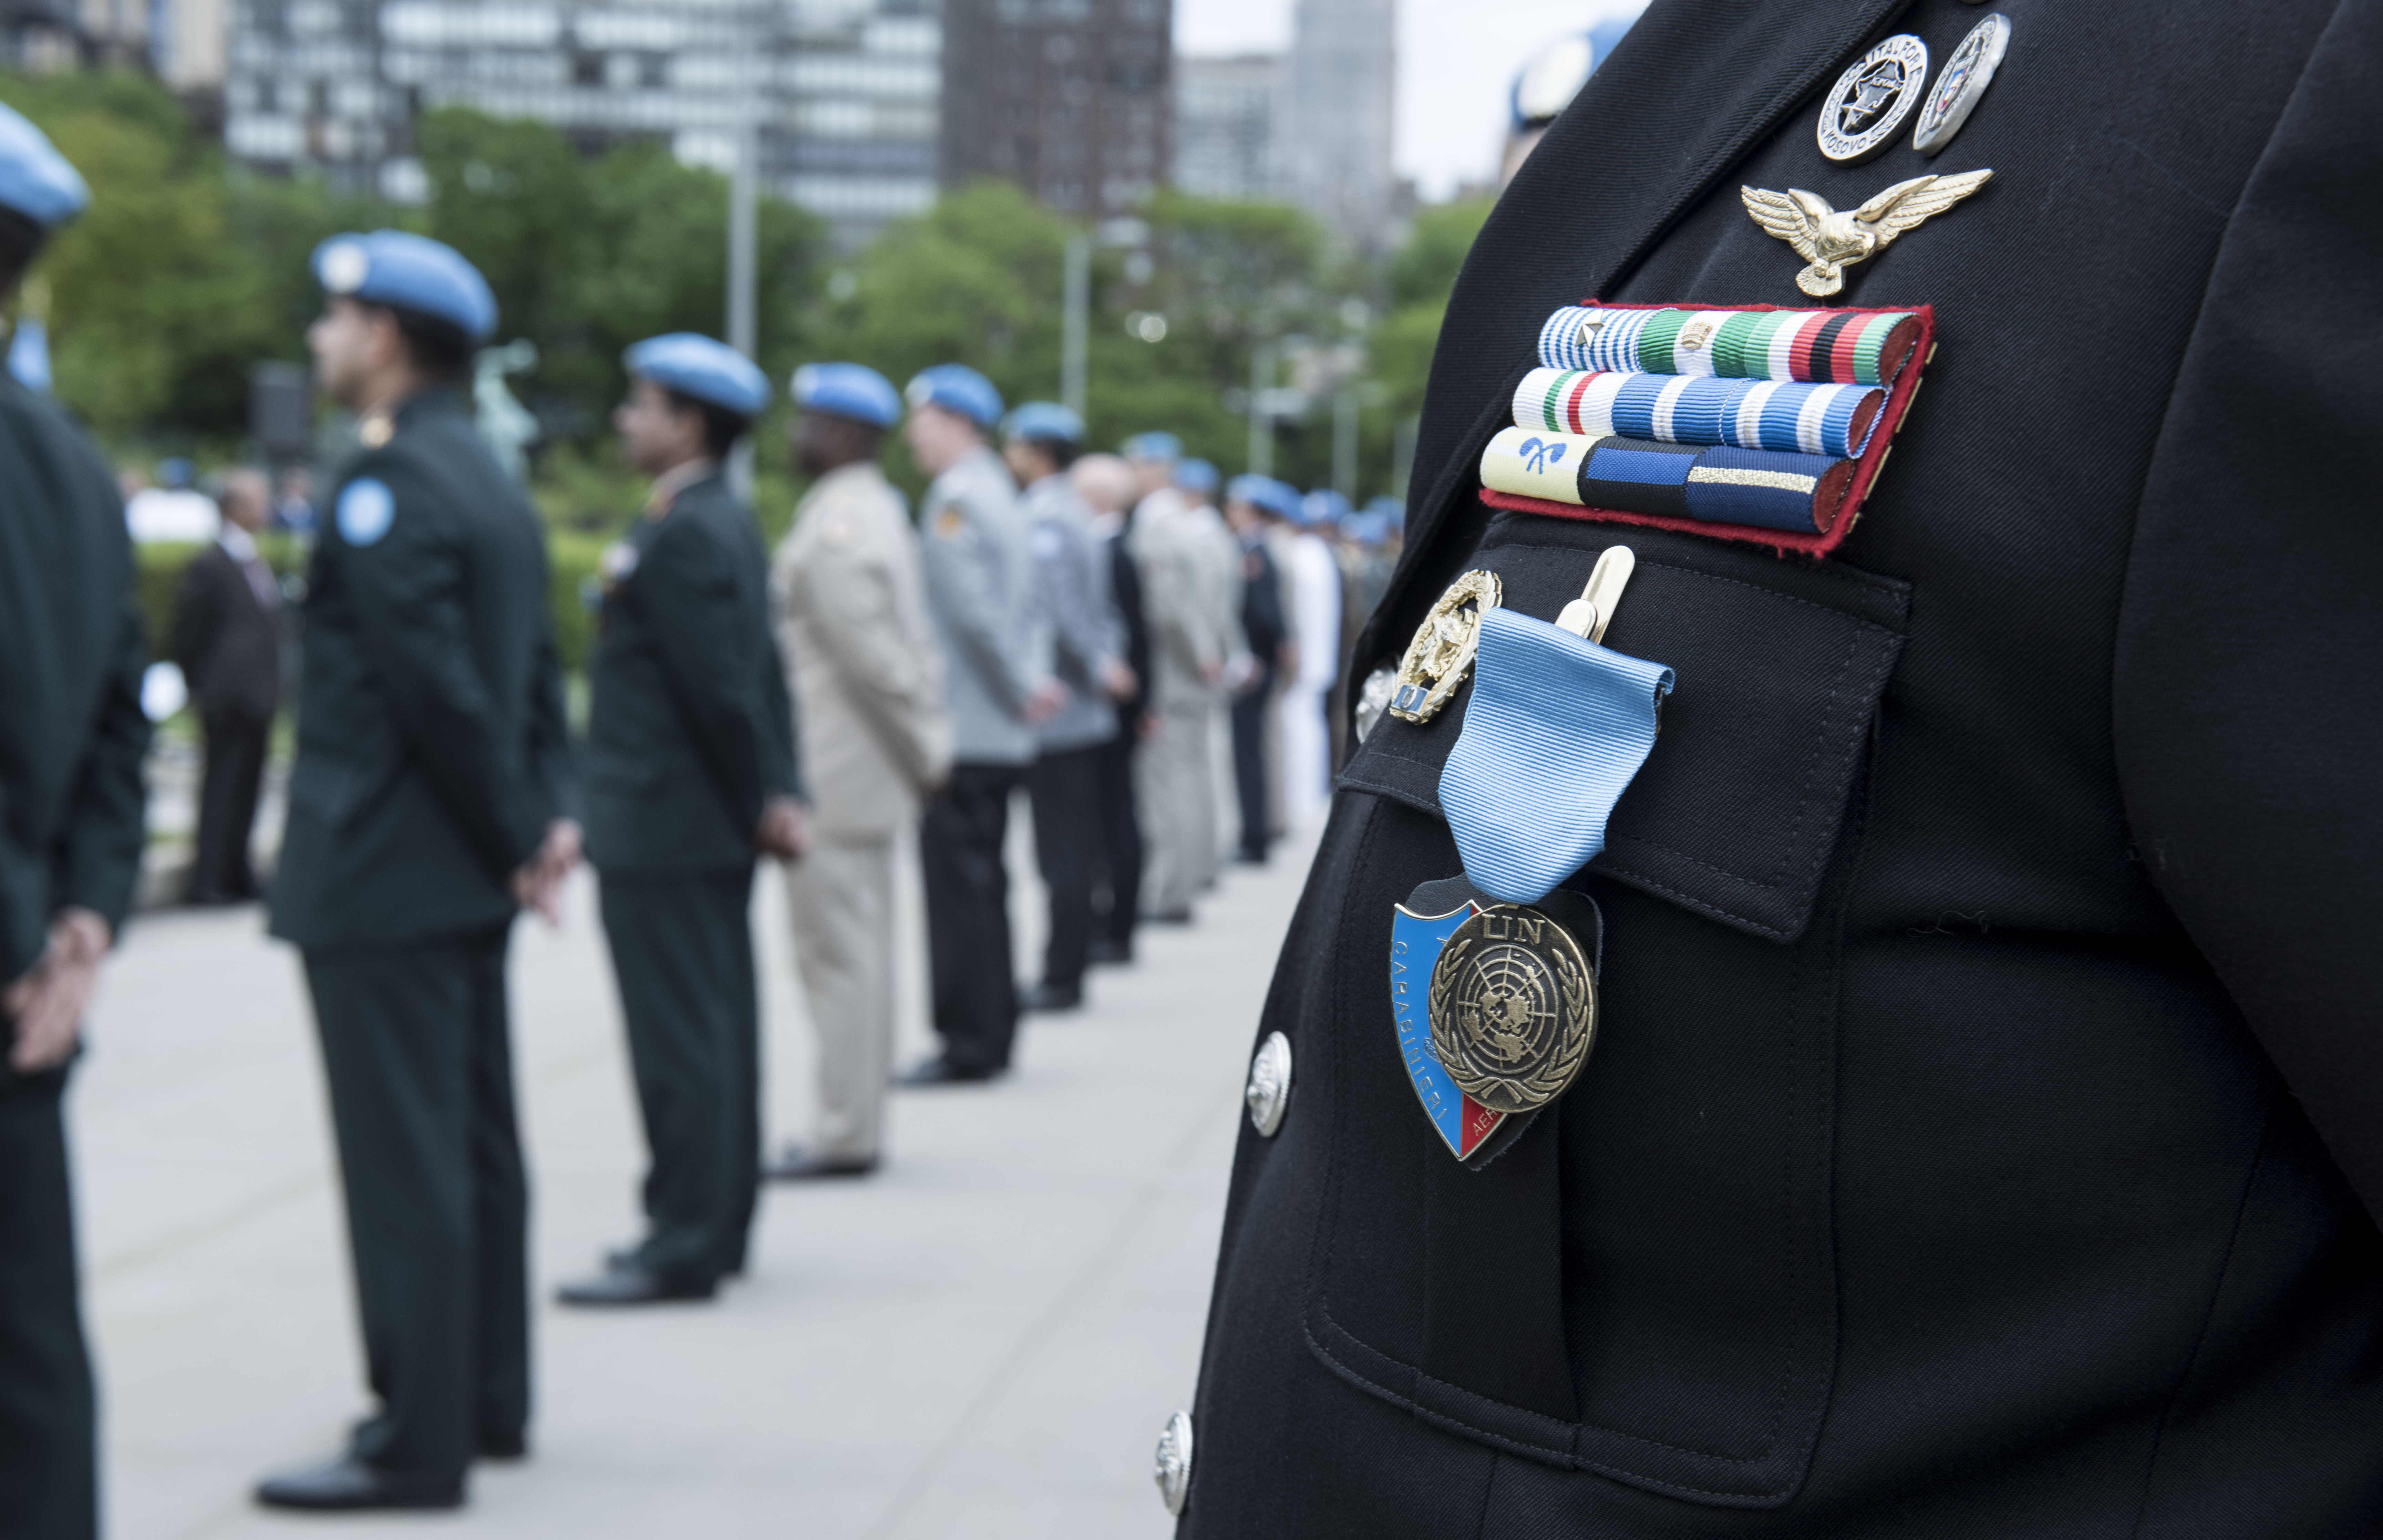 The medal parade for military and police serving at UNHQ